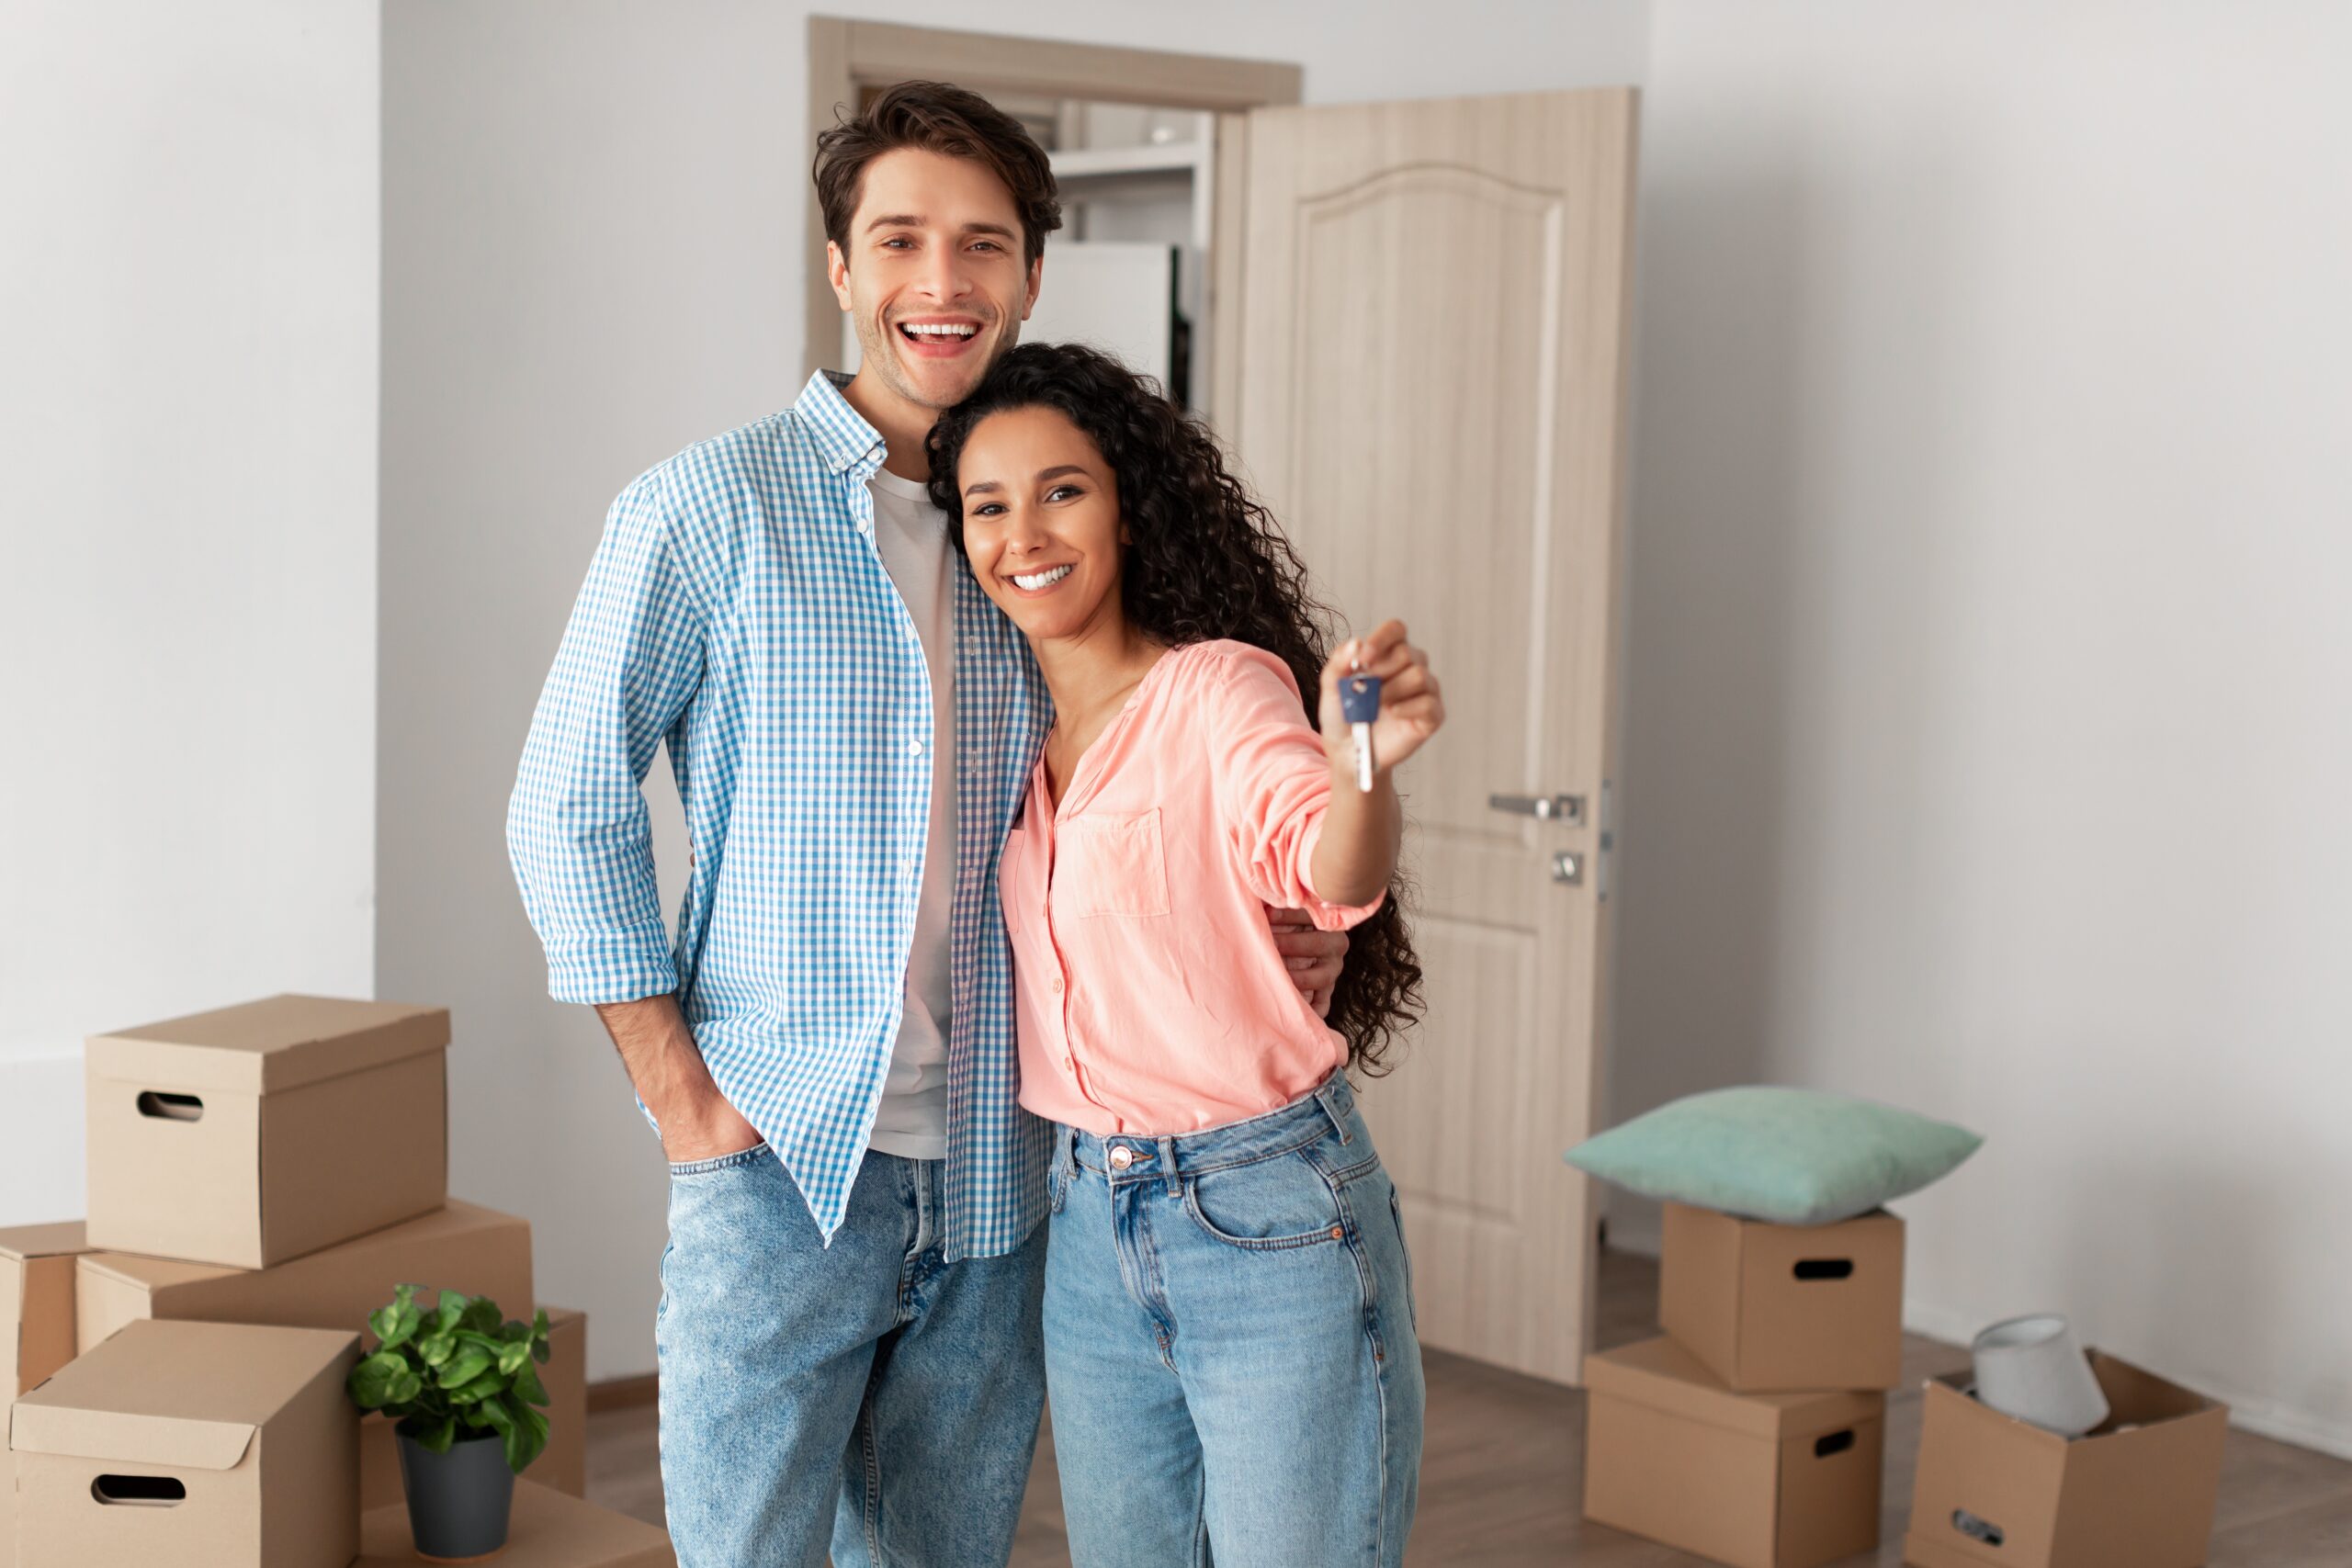 are you a part of the gen-z hombuyers group? here are some awesome tips for buying your home! call us today! (614) 451-6616